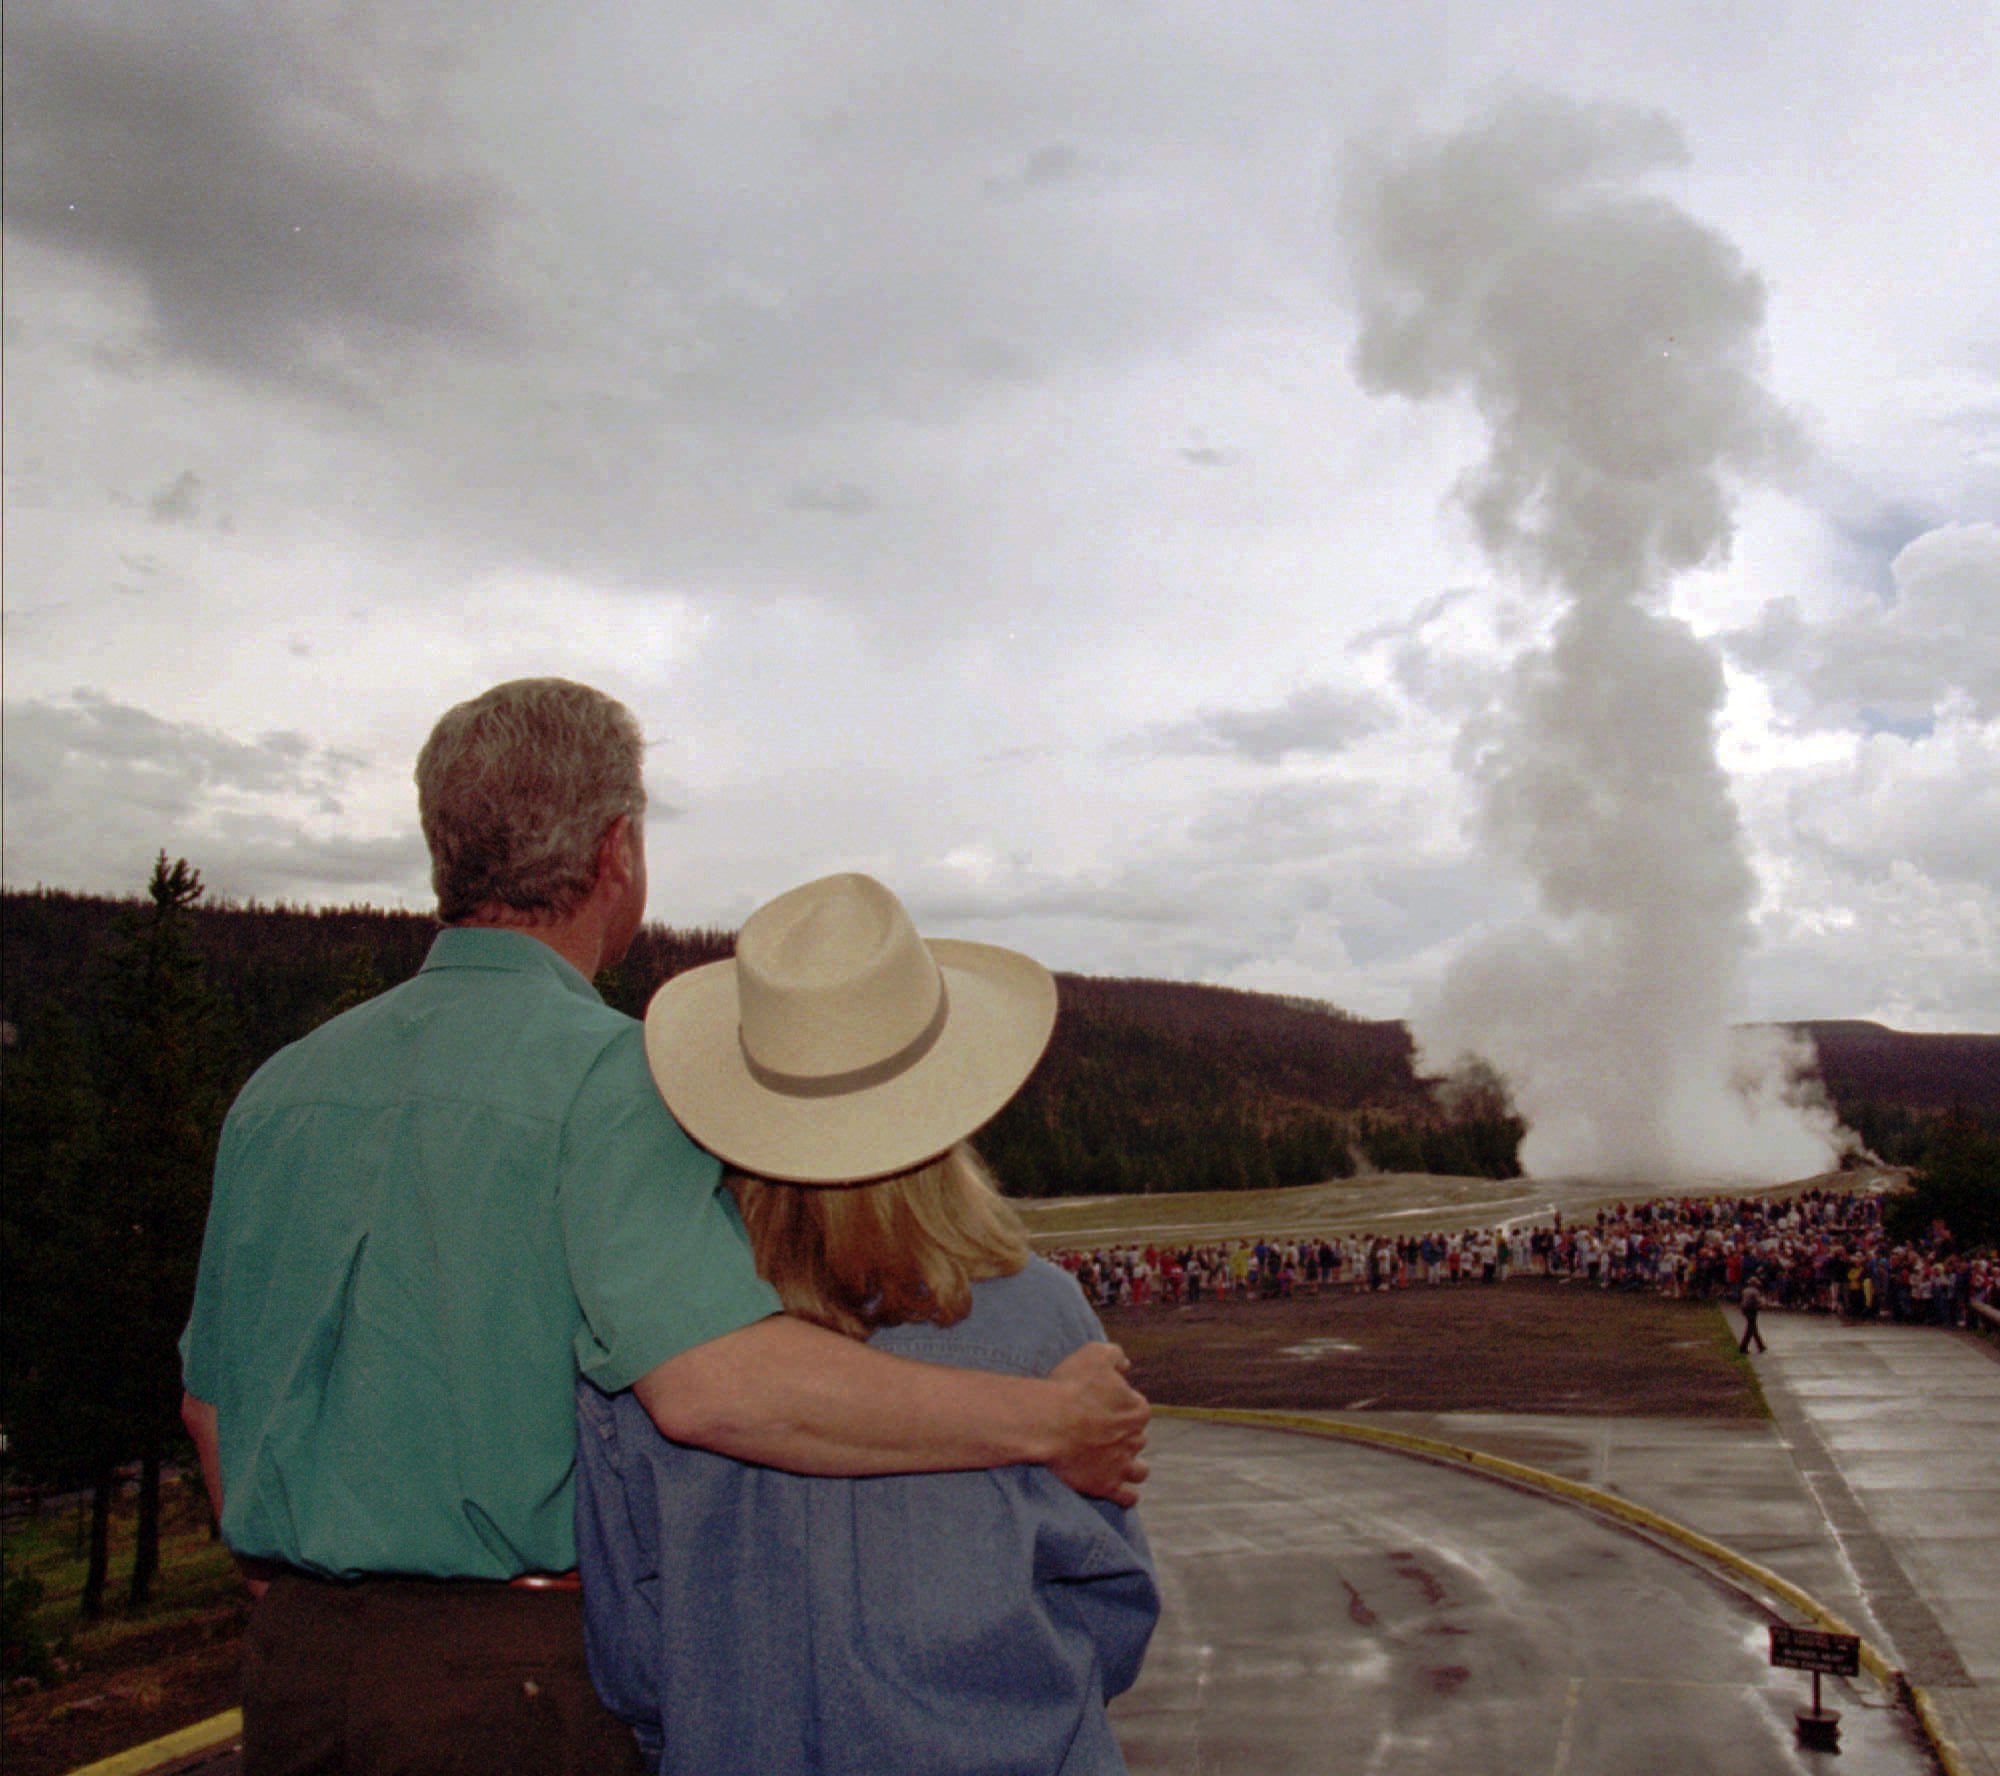 President Bill Clinton puts an arm around his wife, Hillary Clinton, while watching Old Faithful erupt at Yellowstone National Park, Wyo., on Aug. 25, 1995. The first family visited several Yellowstone sites while on vacation.